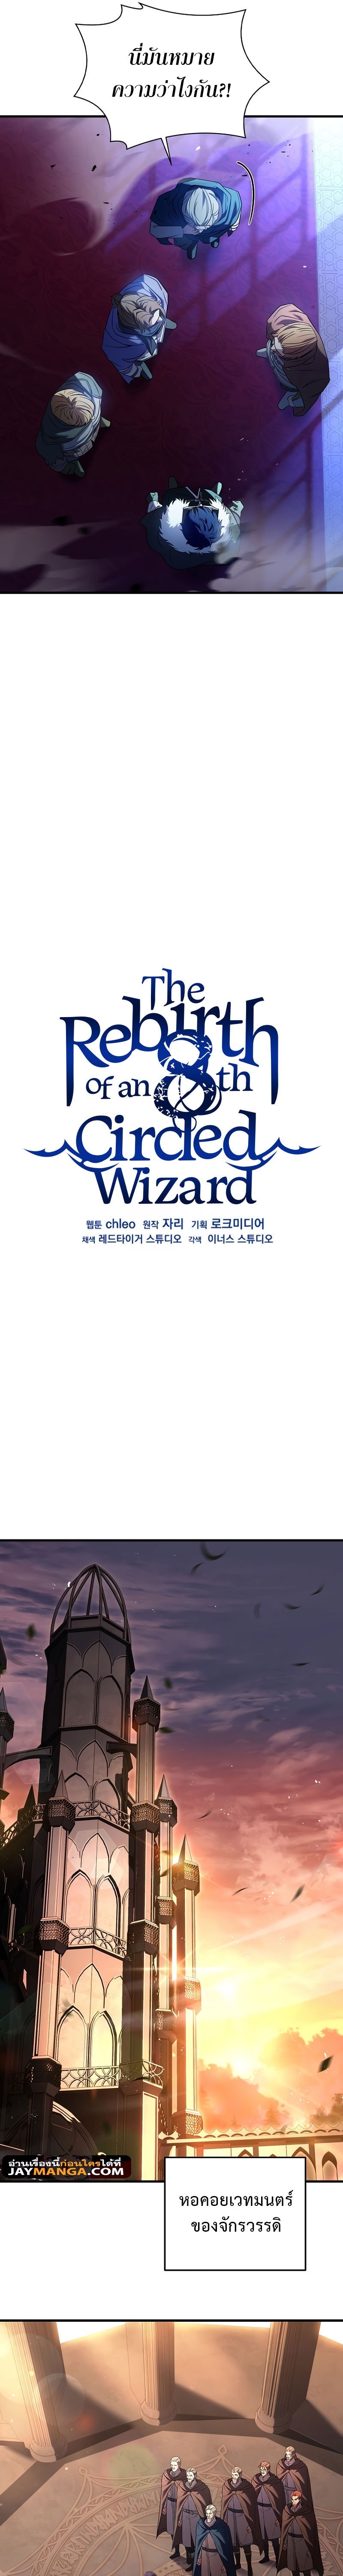 the rebirth of an 8th circled wizard 129.17